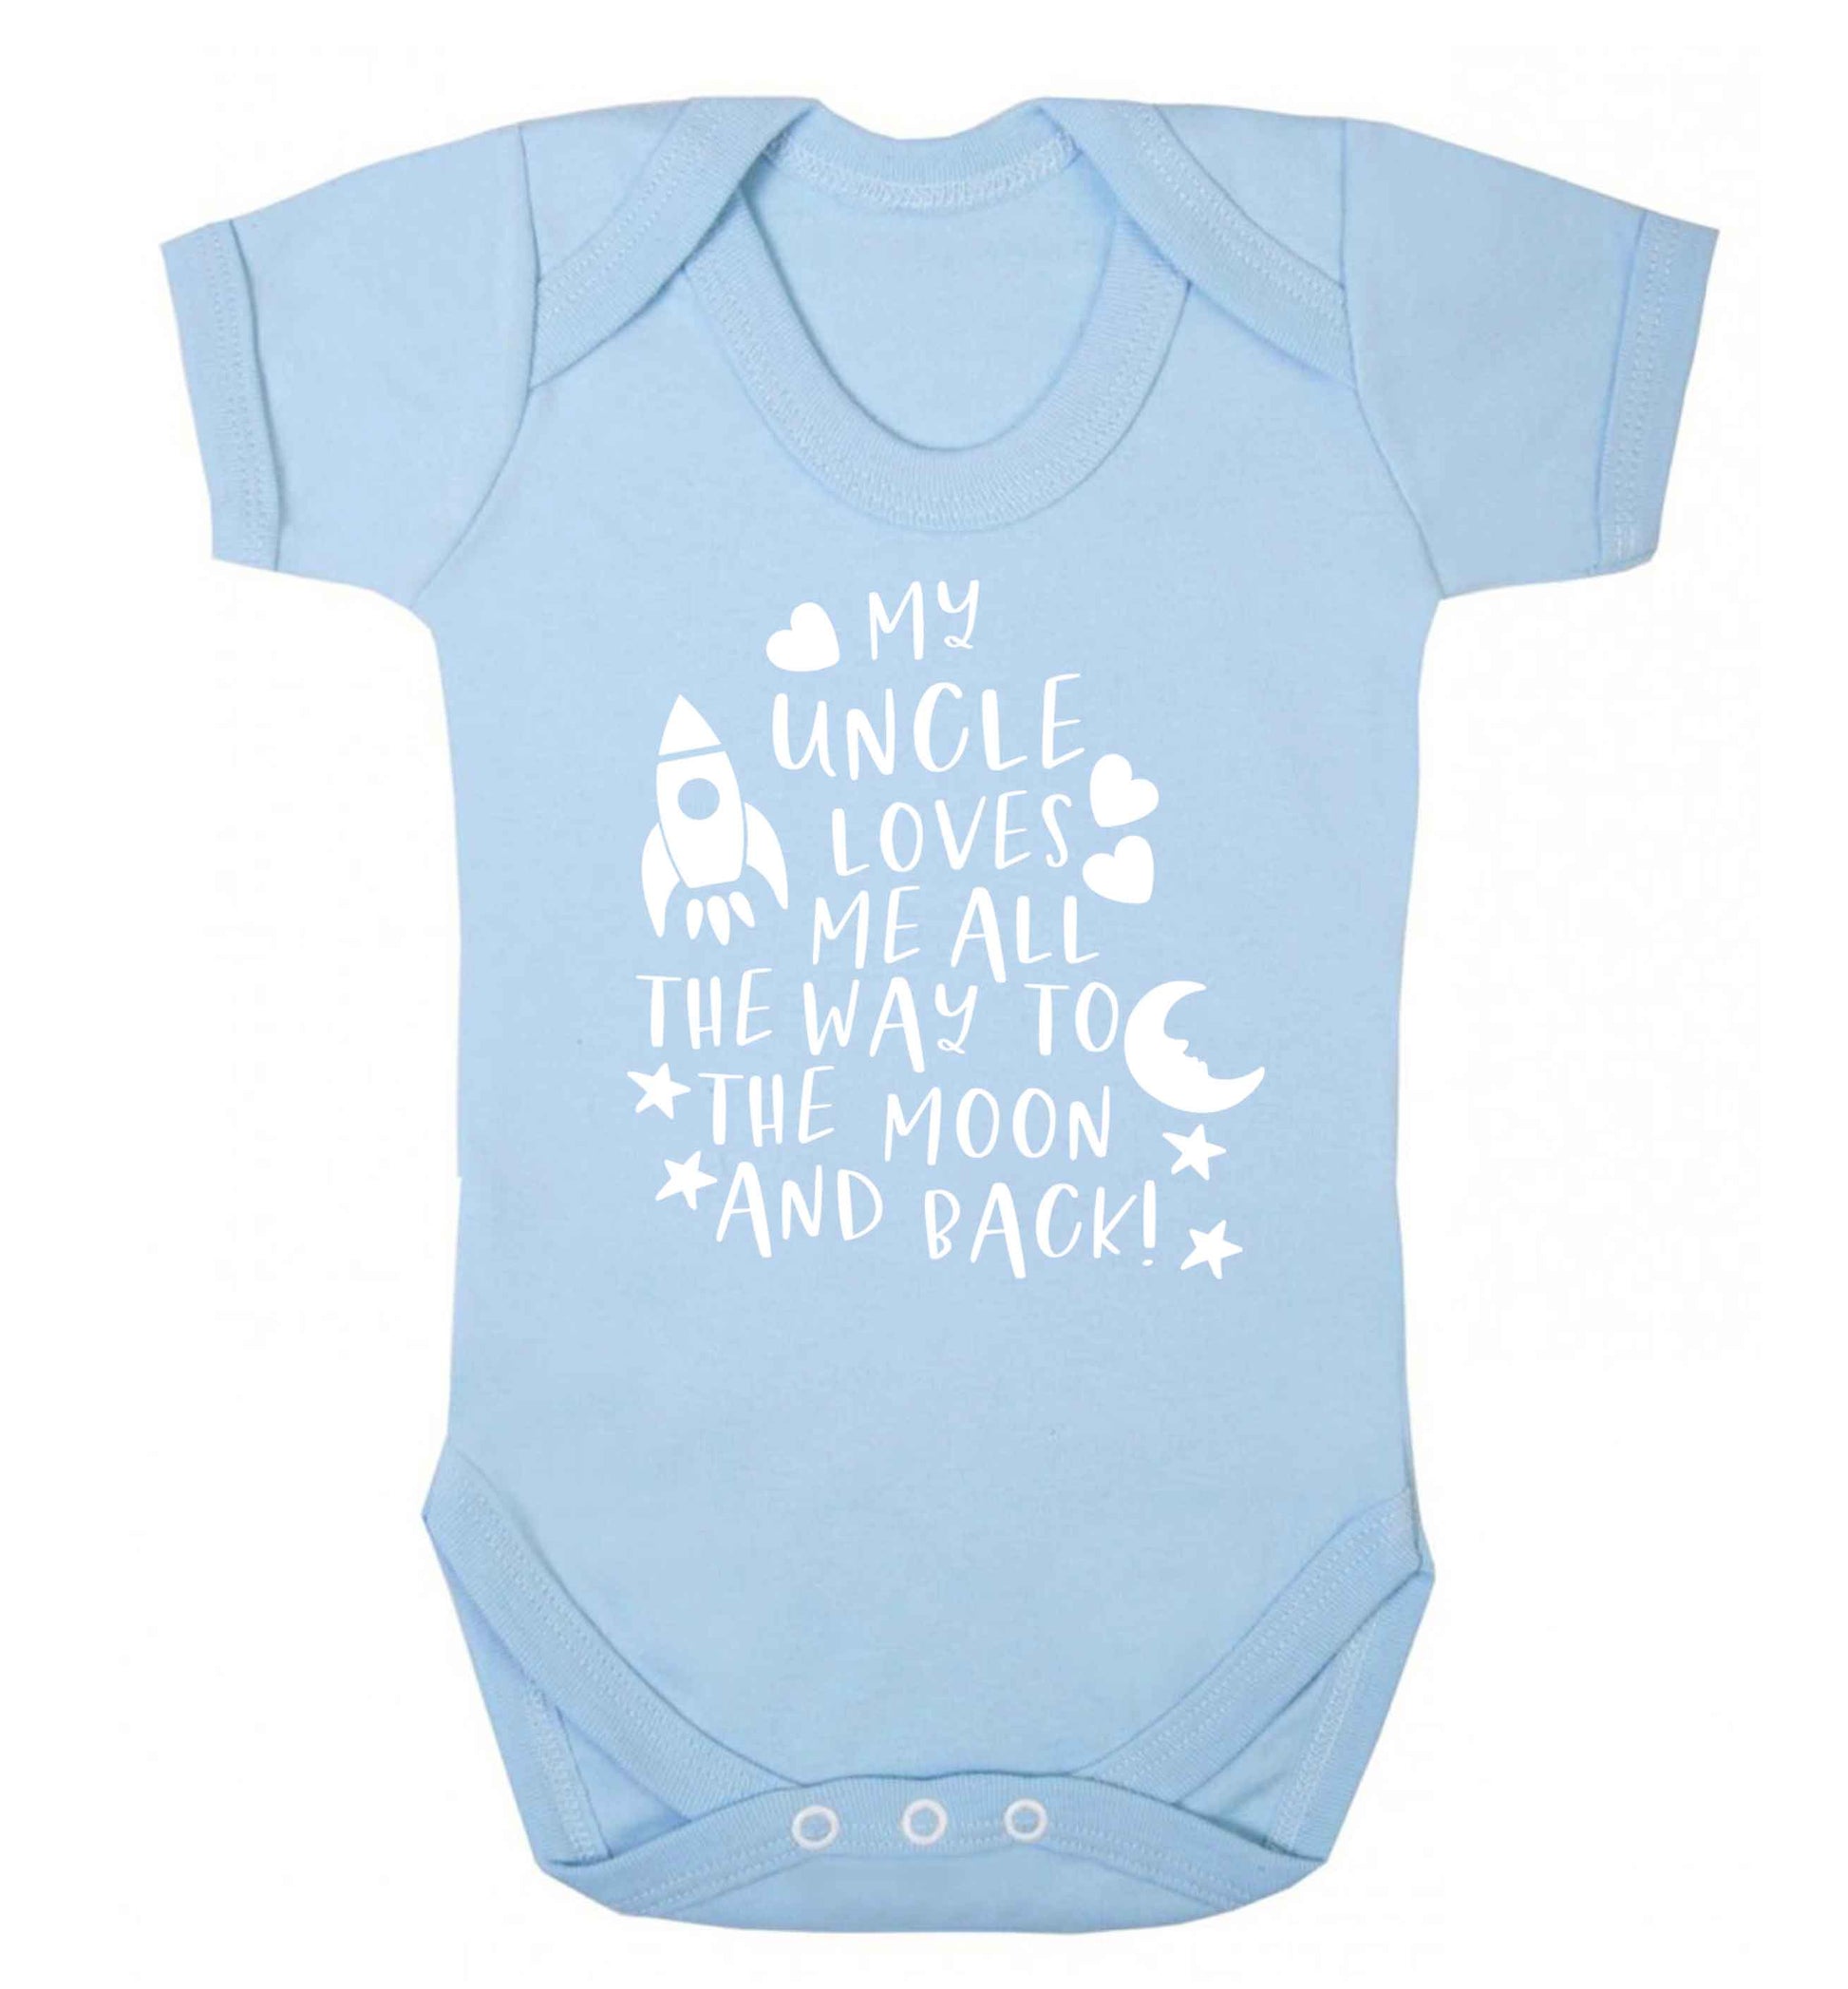 My uncle loves me all the way to the moon and back Baby Vest pale blue 18-24 months